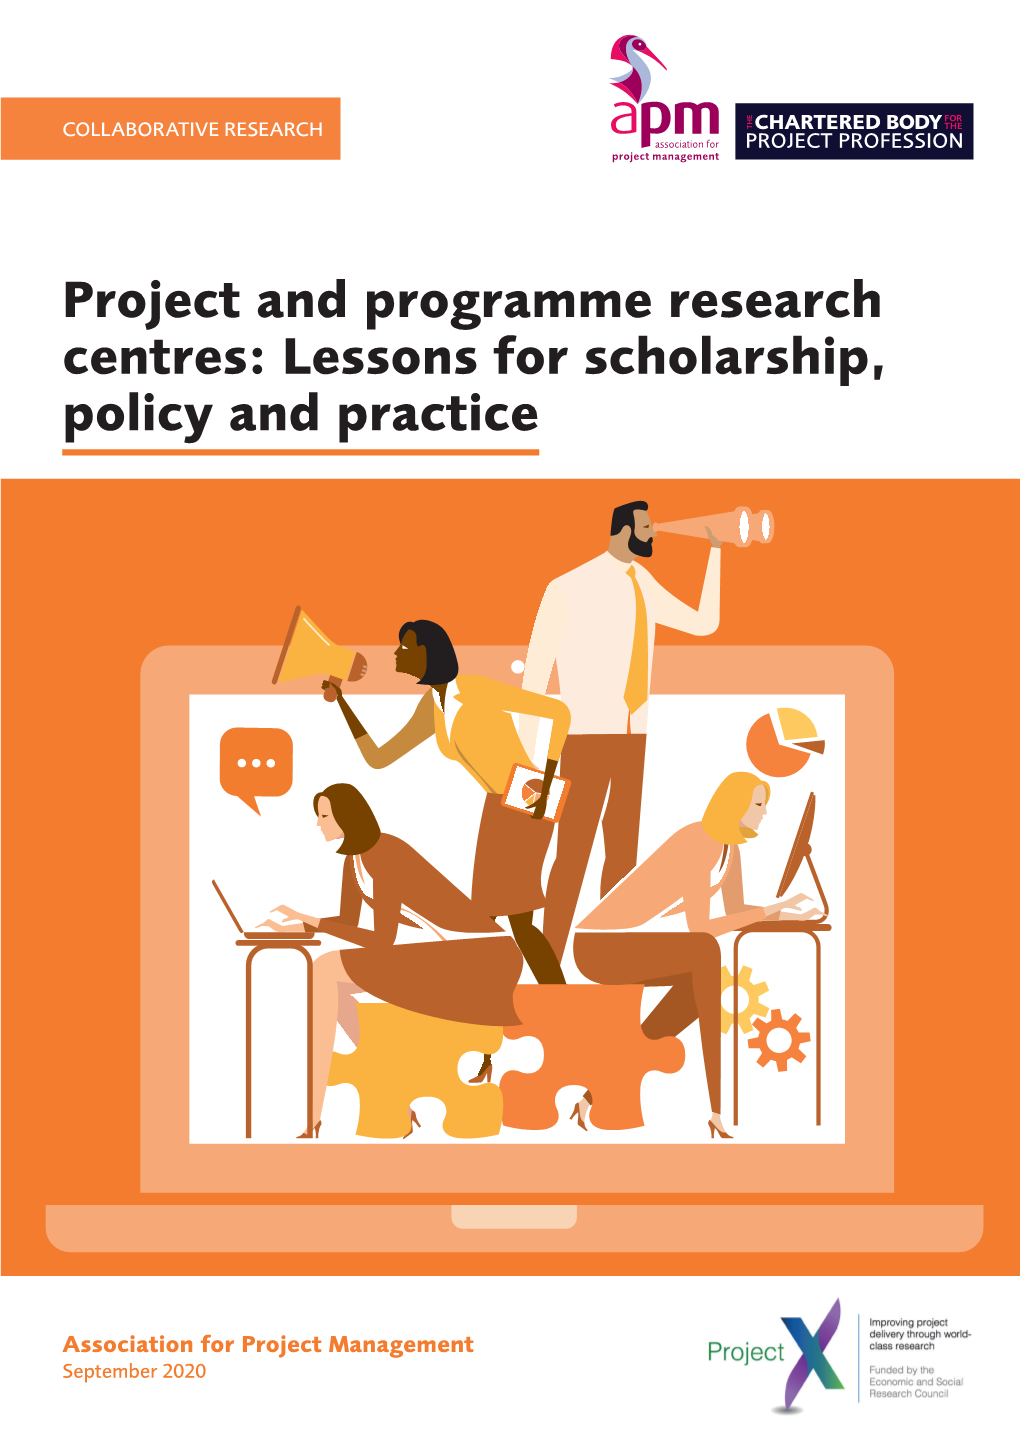 Project and Programme Research Centres: Lessons for Scholarship, Policy and Practice